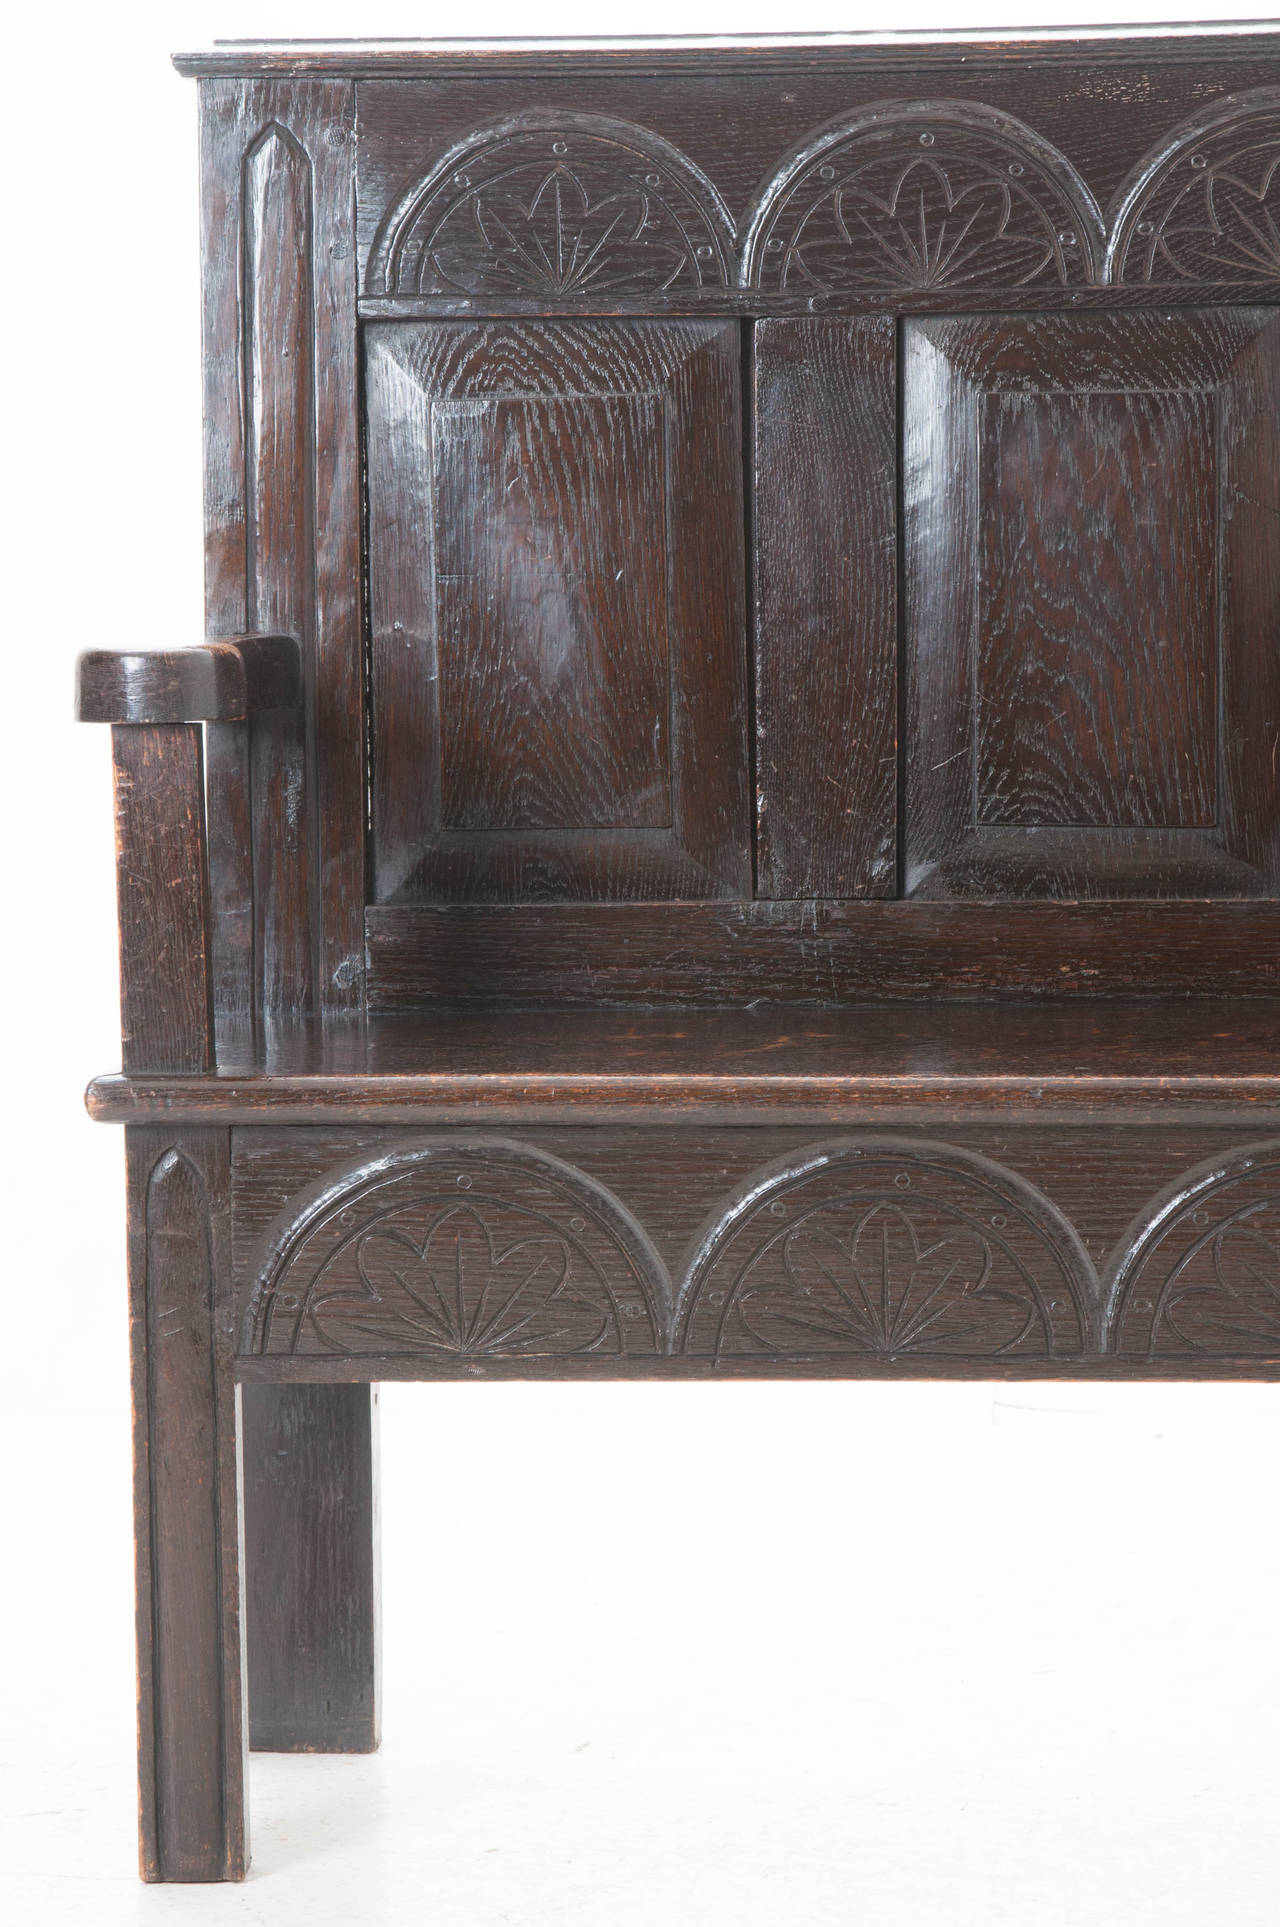 A fabulous hand carved dark oak settle from the late 1700s has stood the test of time! Settles were often used by the fireplace, with their high backs they could help keep the heat in. Be sure to view the detail photos!